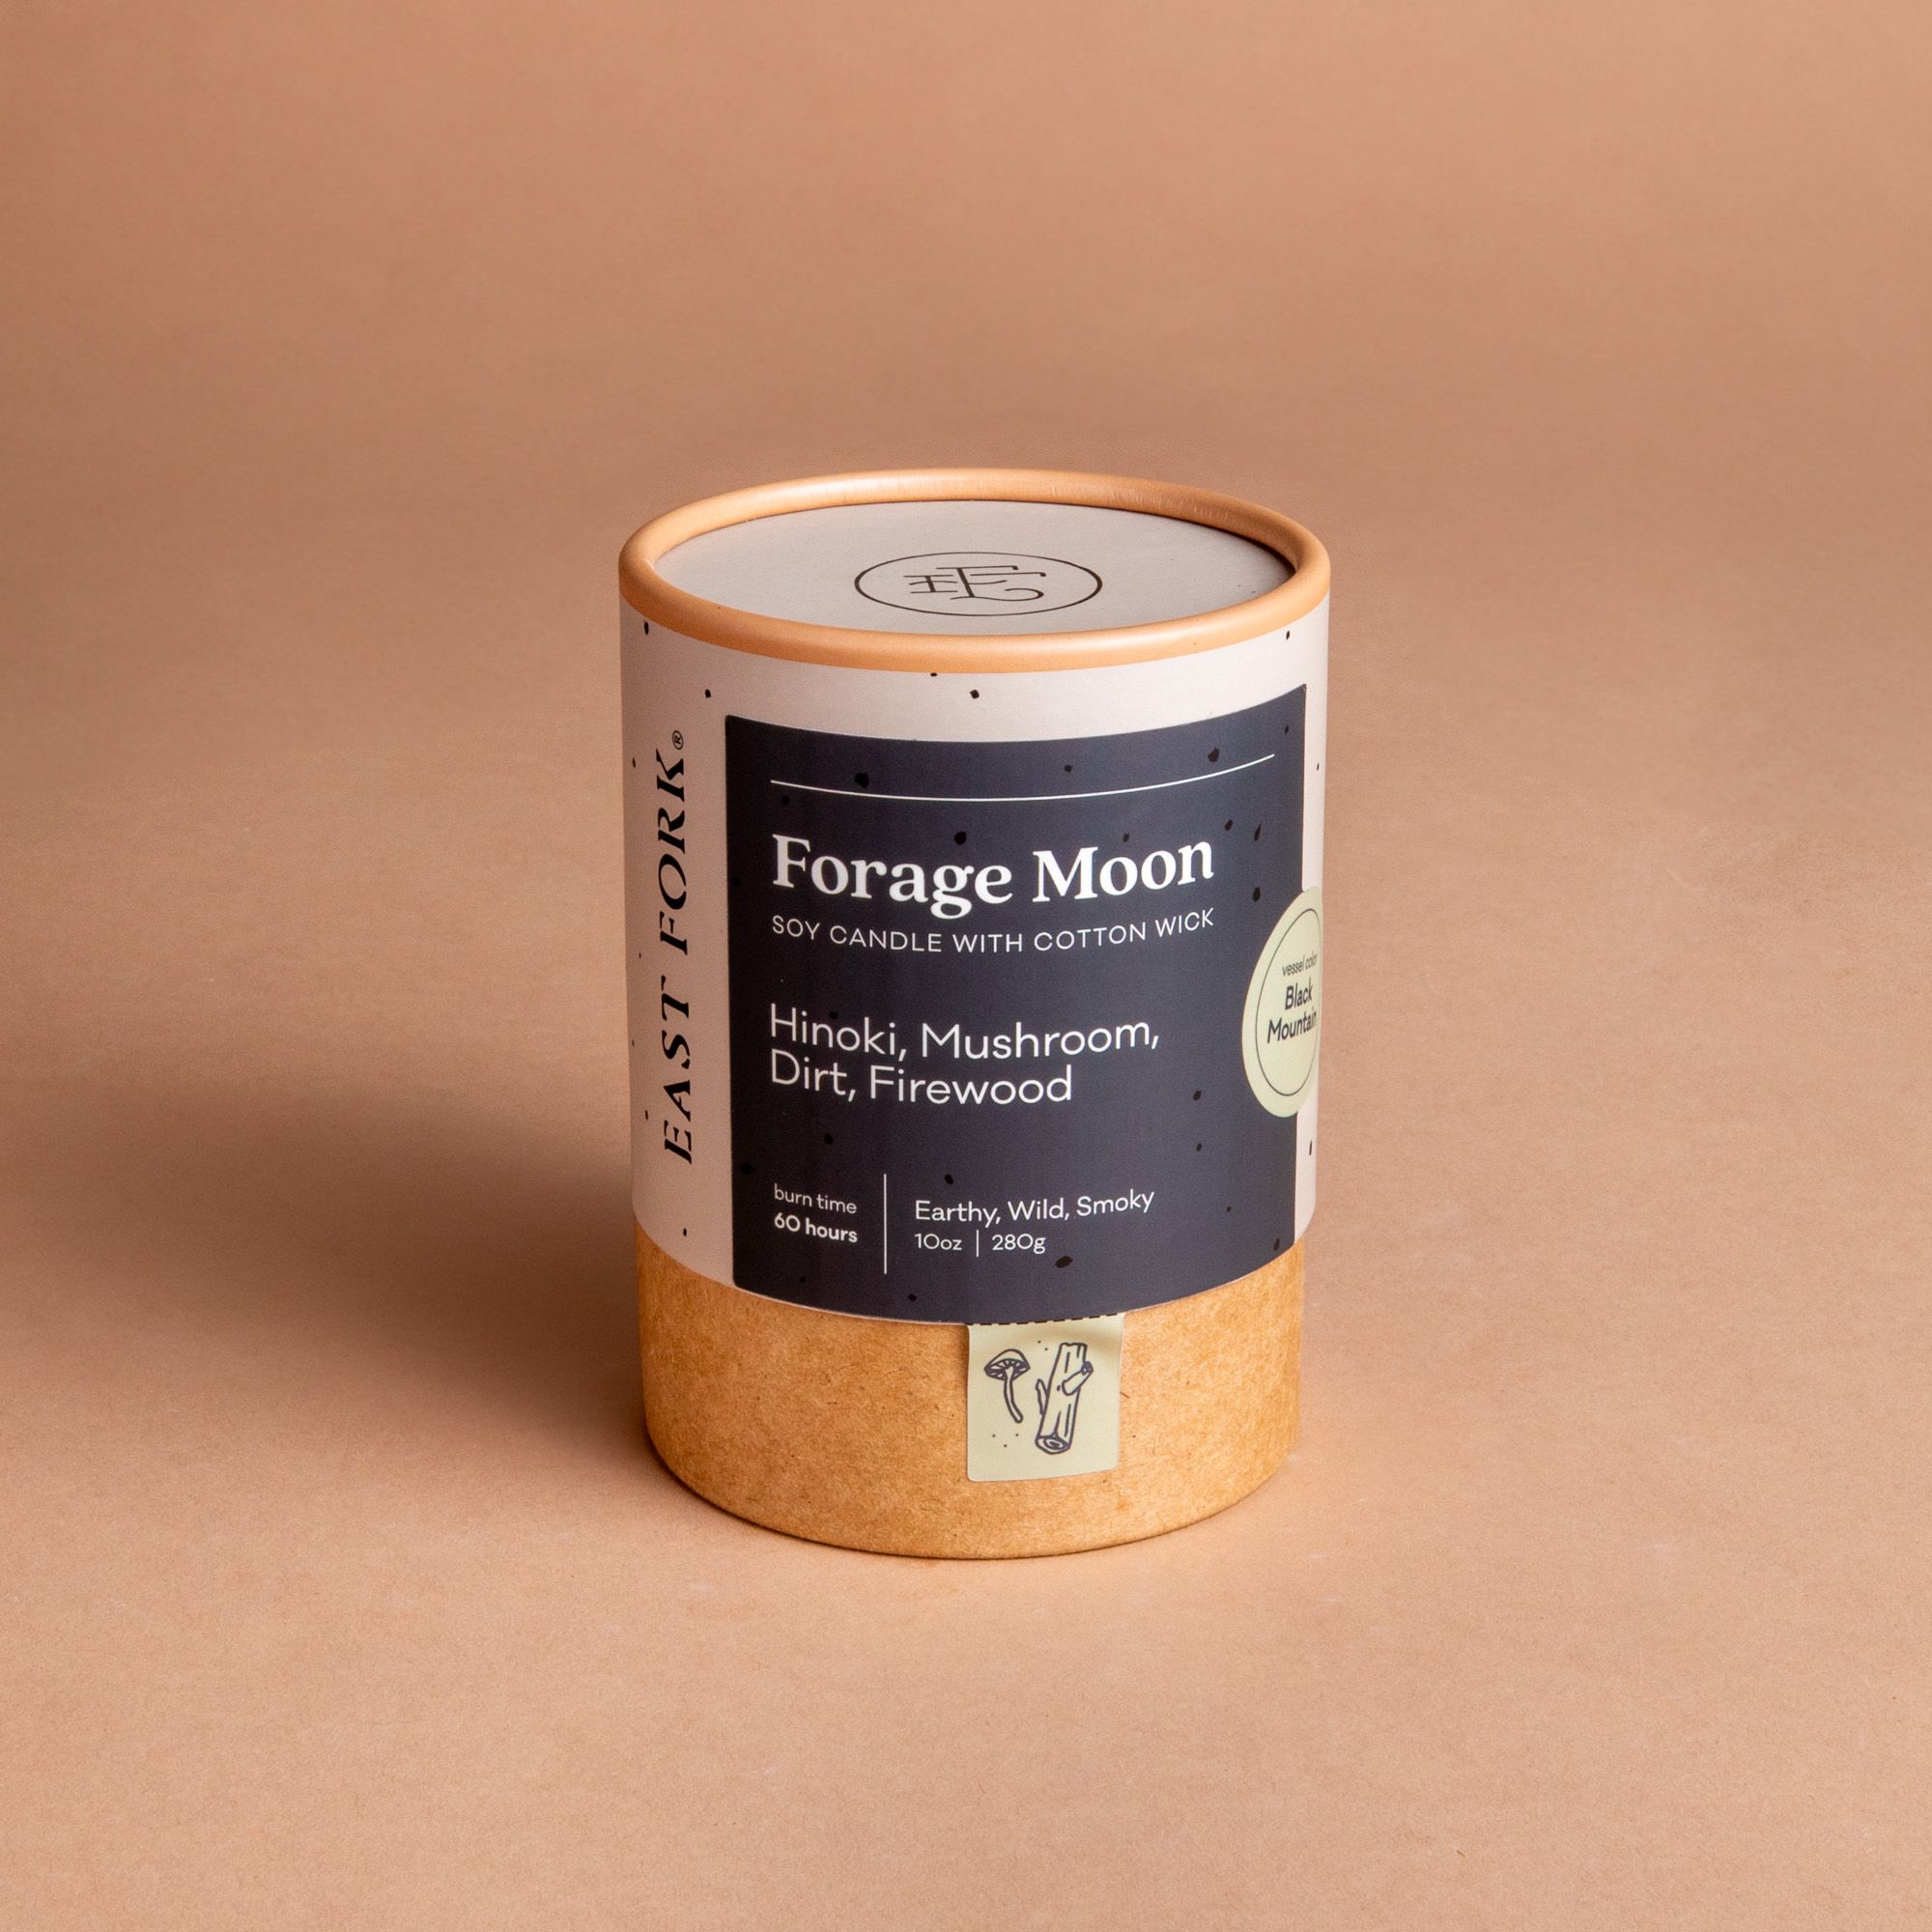 Large cardboard packaging tube with a candle inside with branding on it that says 'Forage Moon'